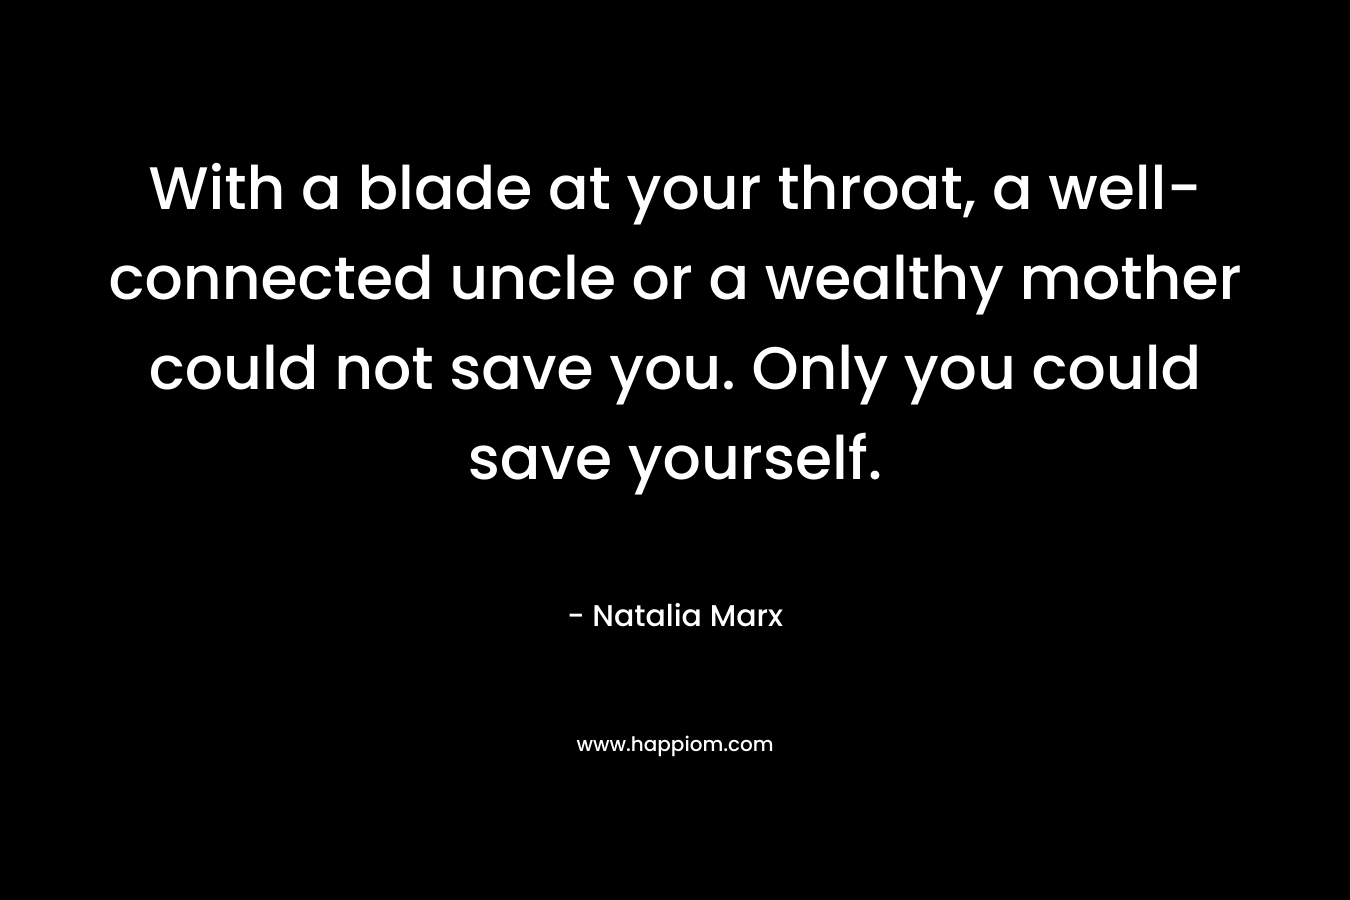 With a blade at your throat, a well-connected uncle or a wealthy mother could not save you. Only you could save yourself. – Natalia Marx